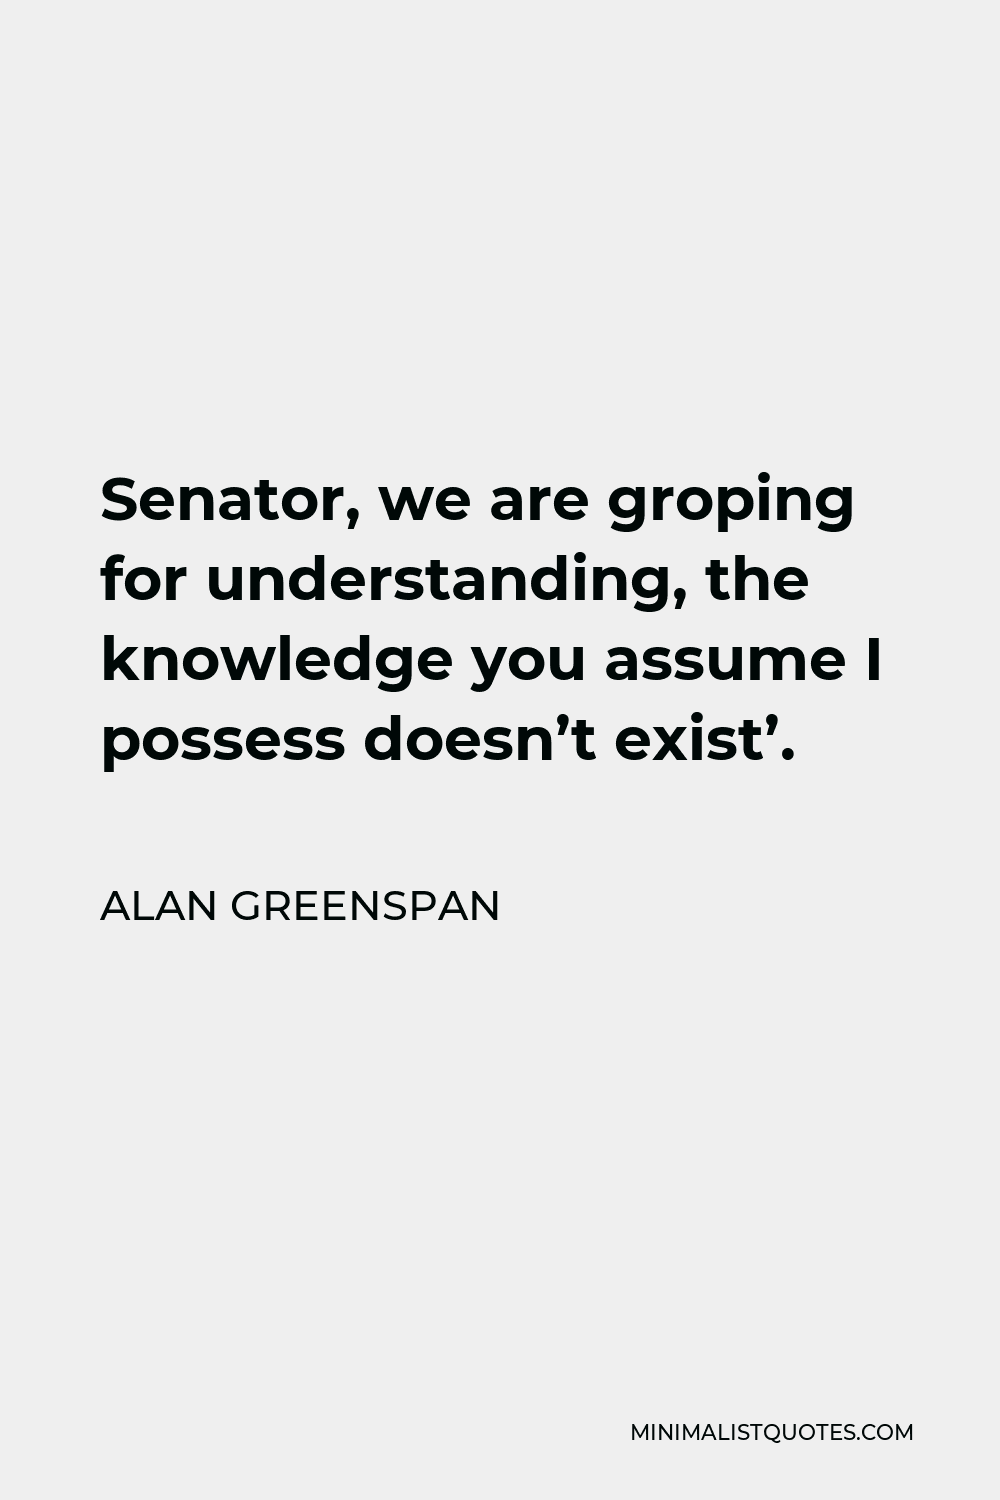 Alan Greenspan Quote - Senator, we are groping for understanding, the knowledge you assume I possess doesn’t exist’.